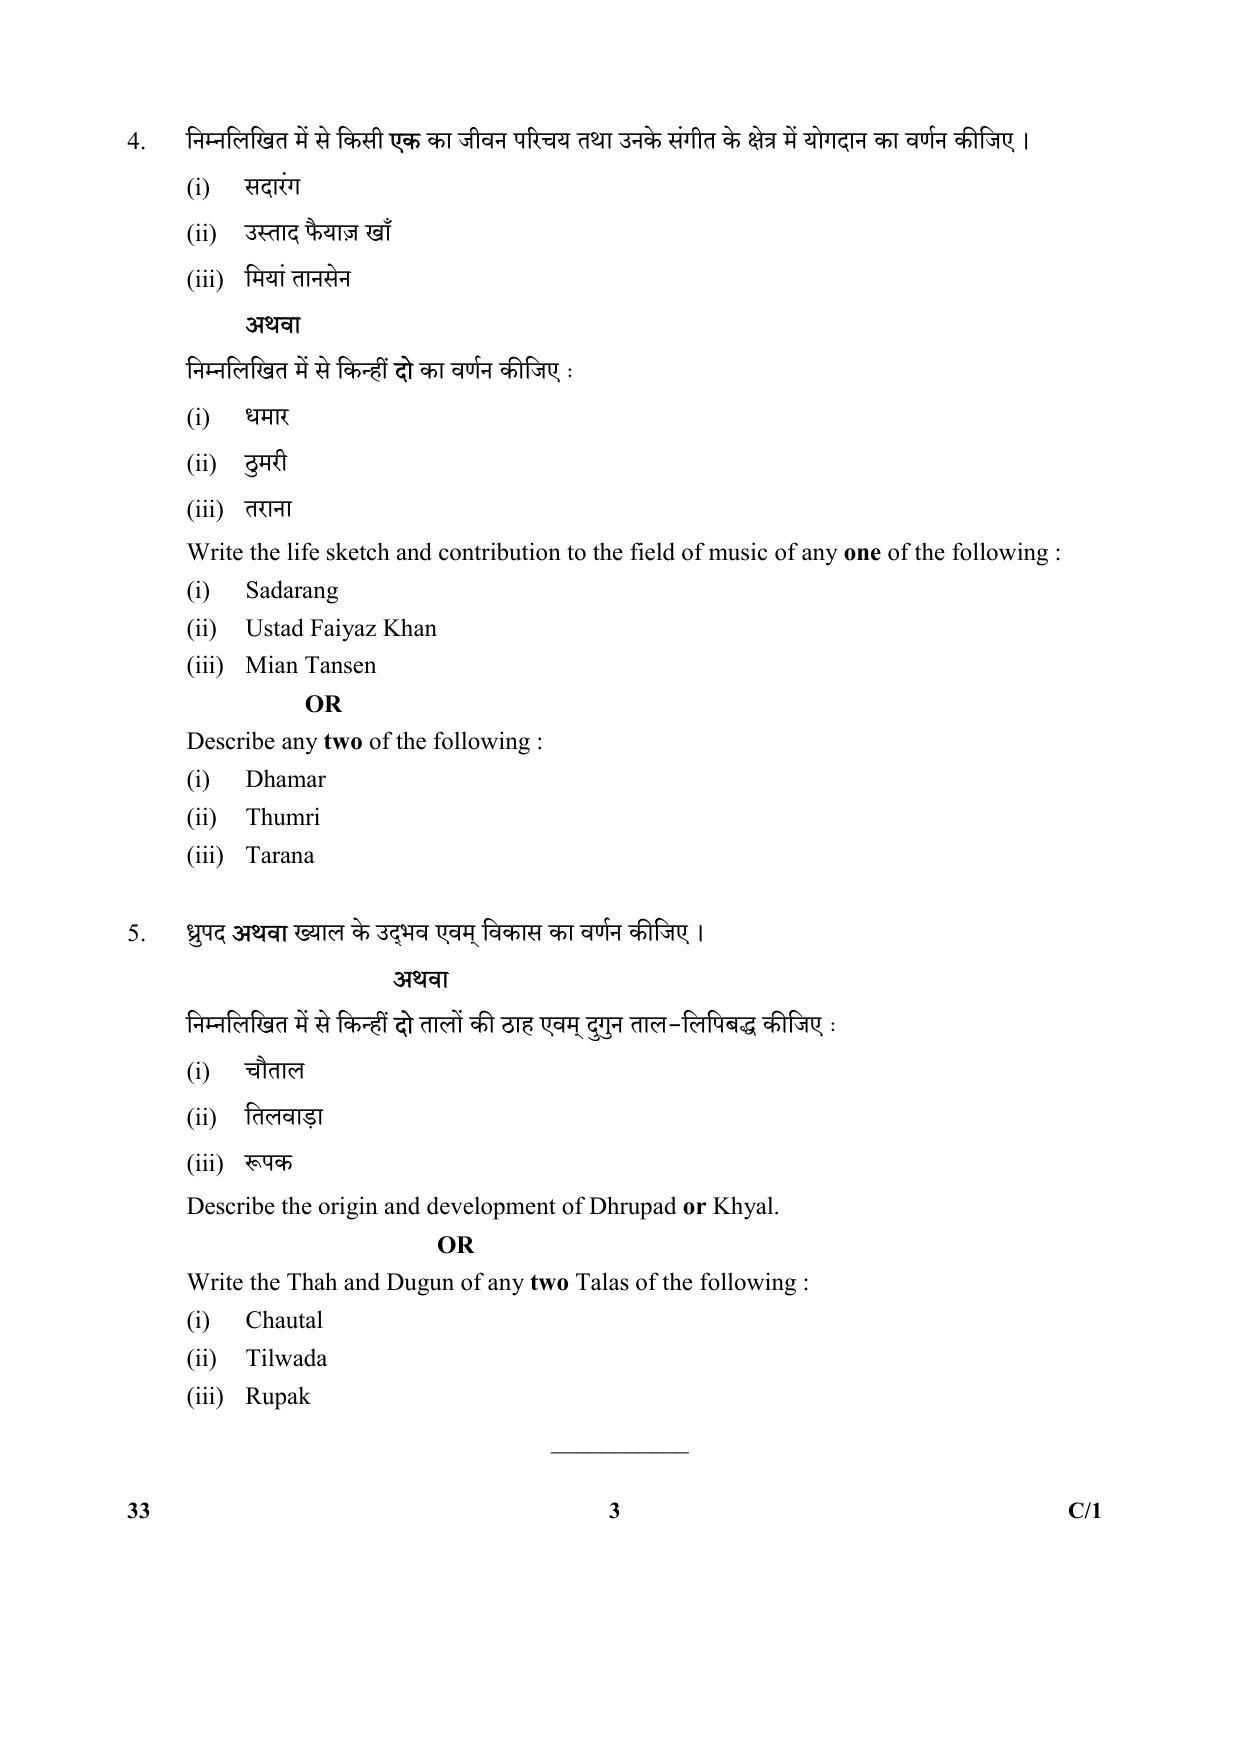 CBSE Class 10 33 (Hindustani Music)_Vocal 2018 Compartment Question Paper - Page 3